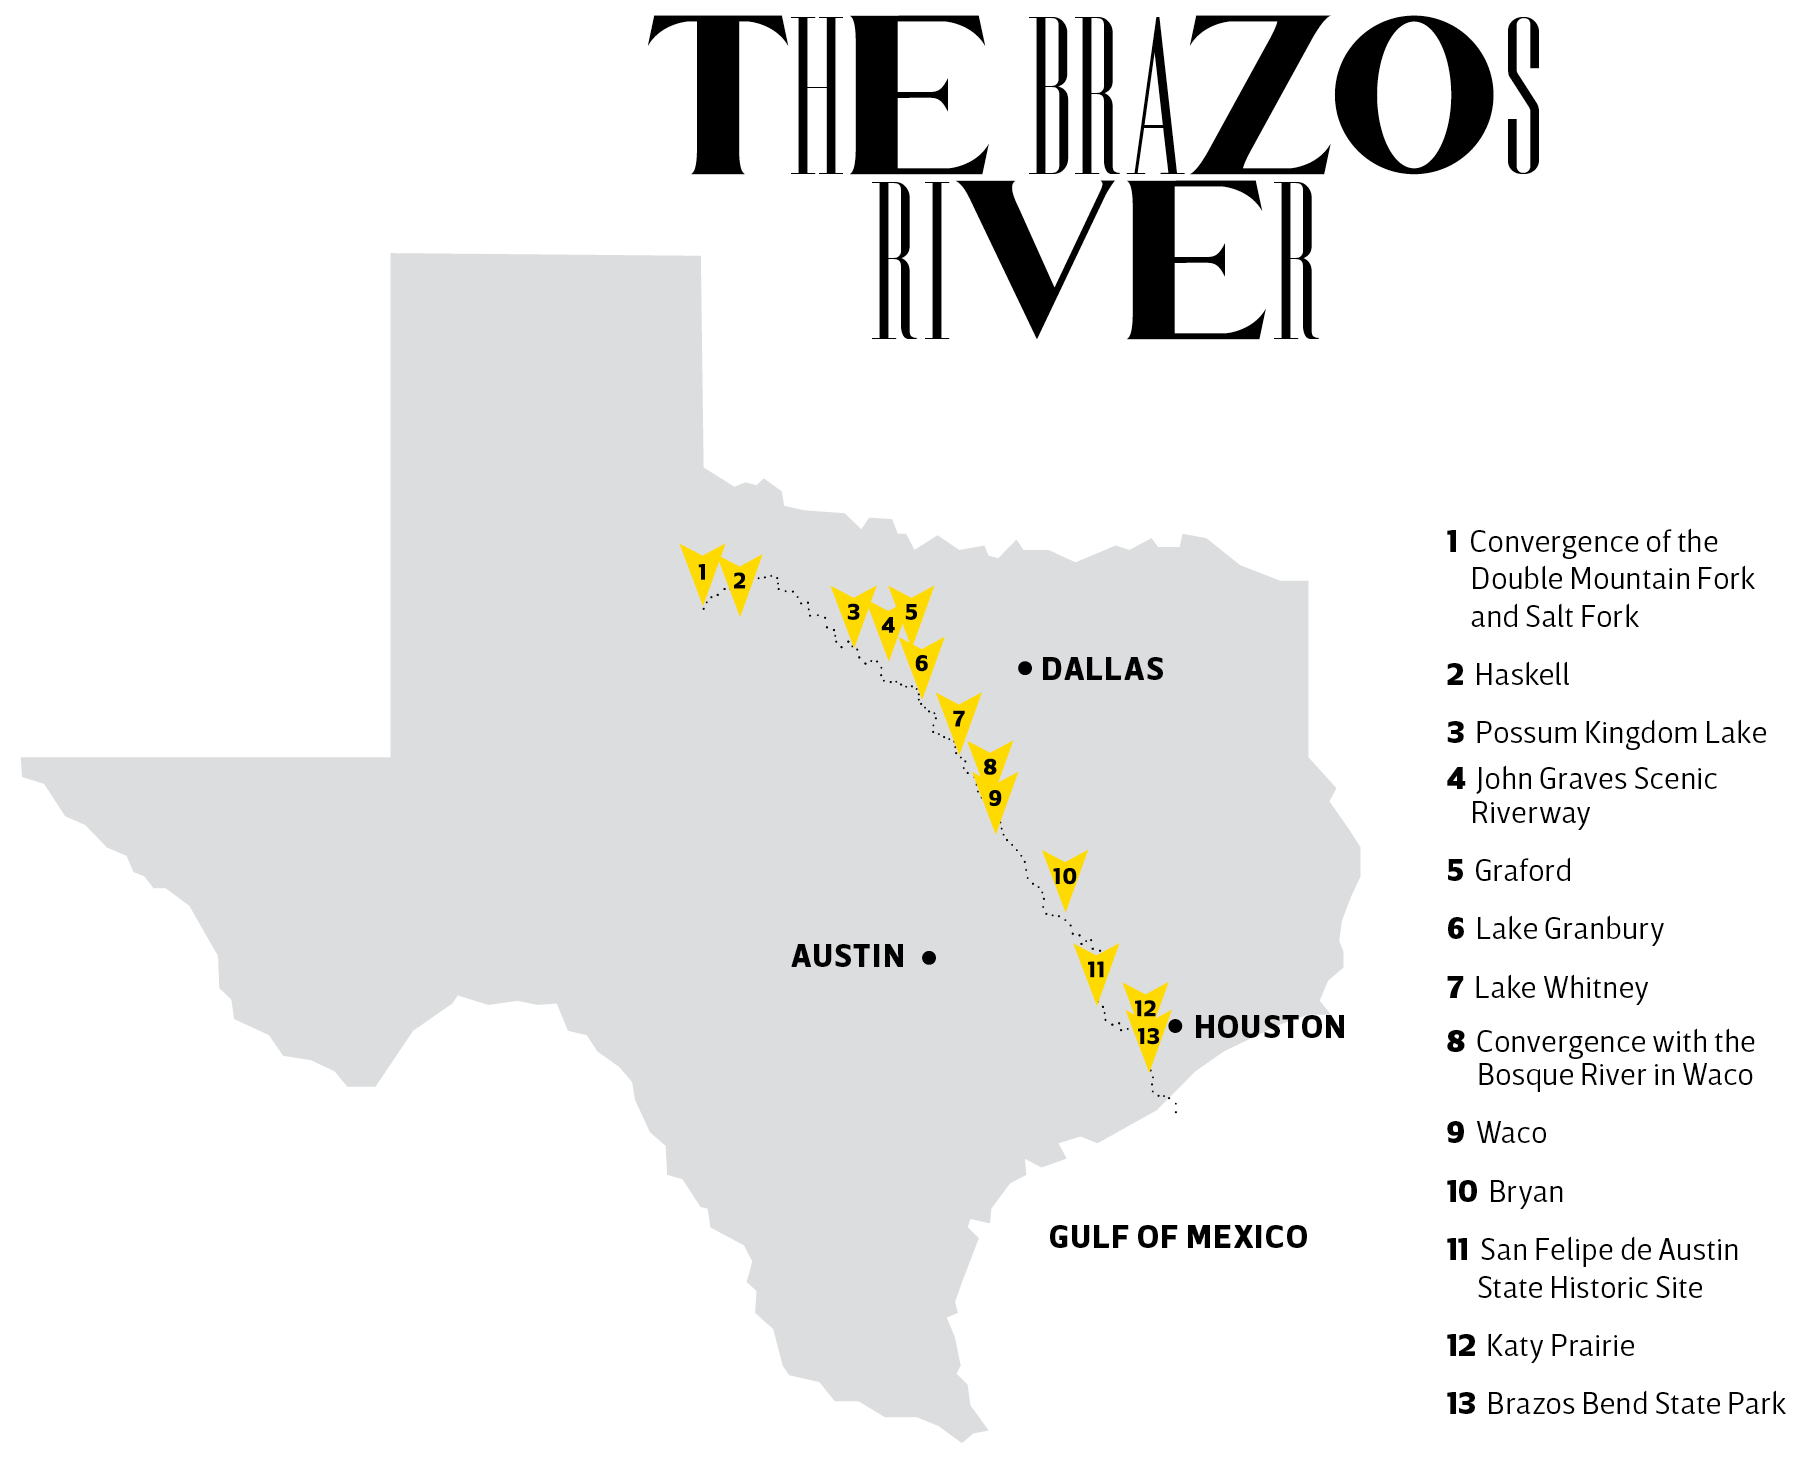 A map showing major points on the Brazos river